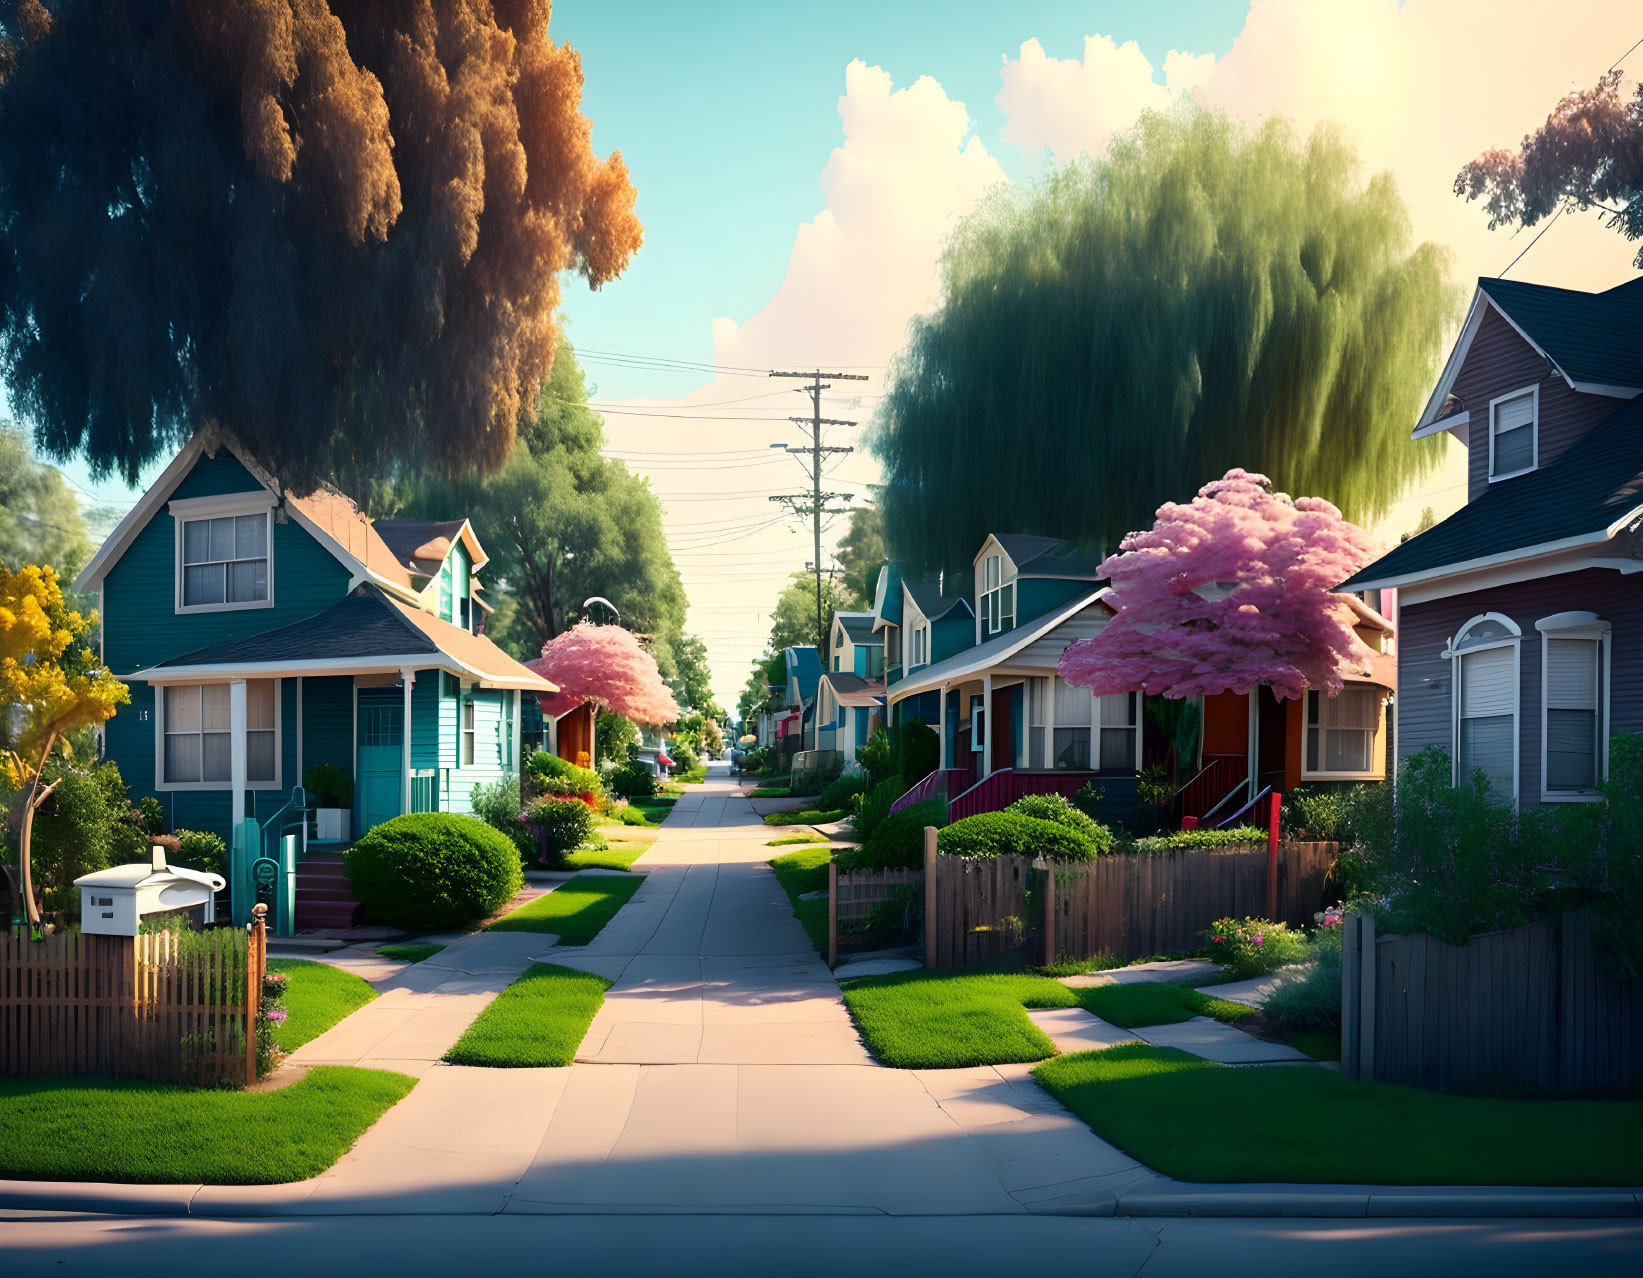 Colorful suburban street with blooming trees & manicured lawns